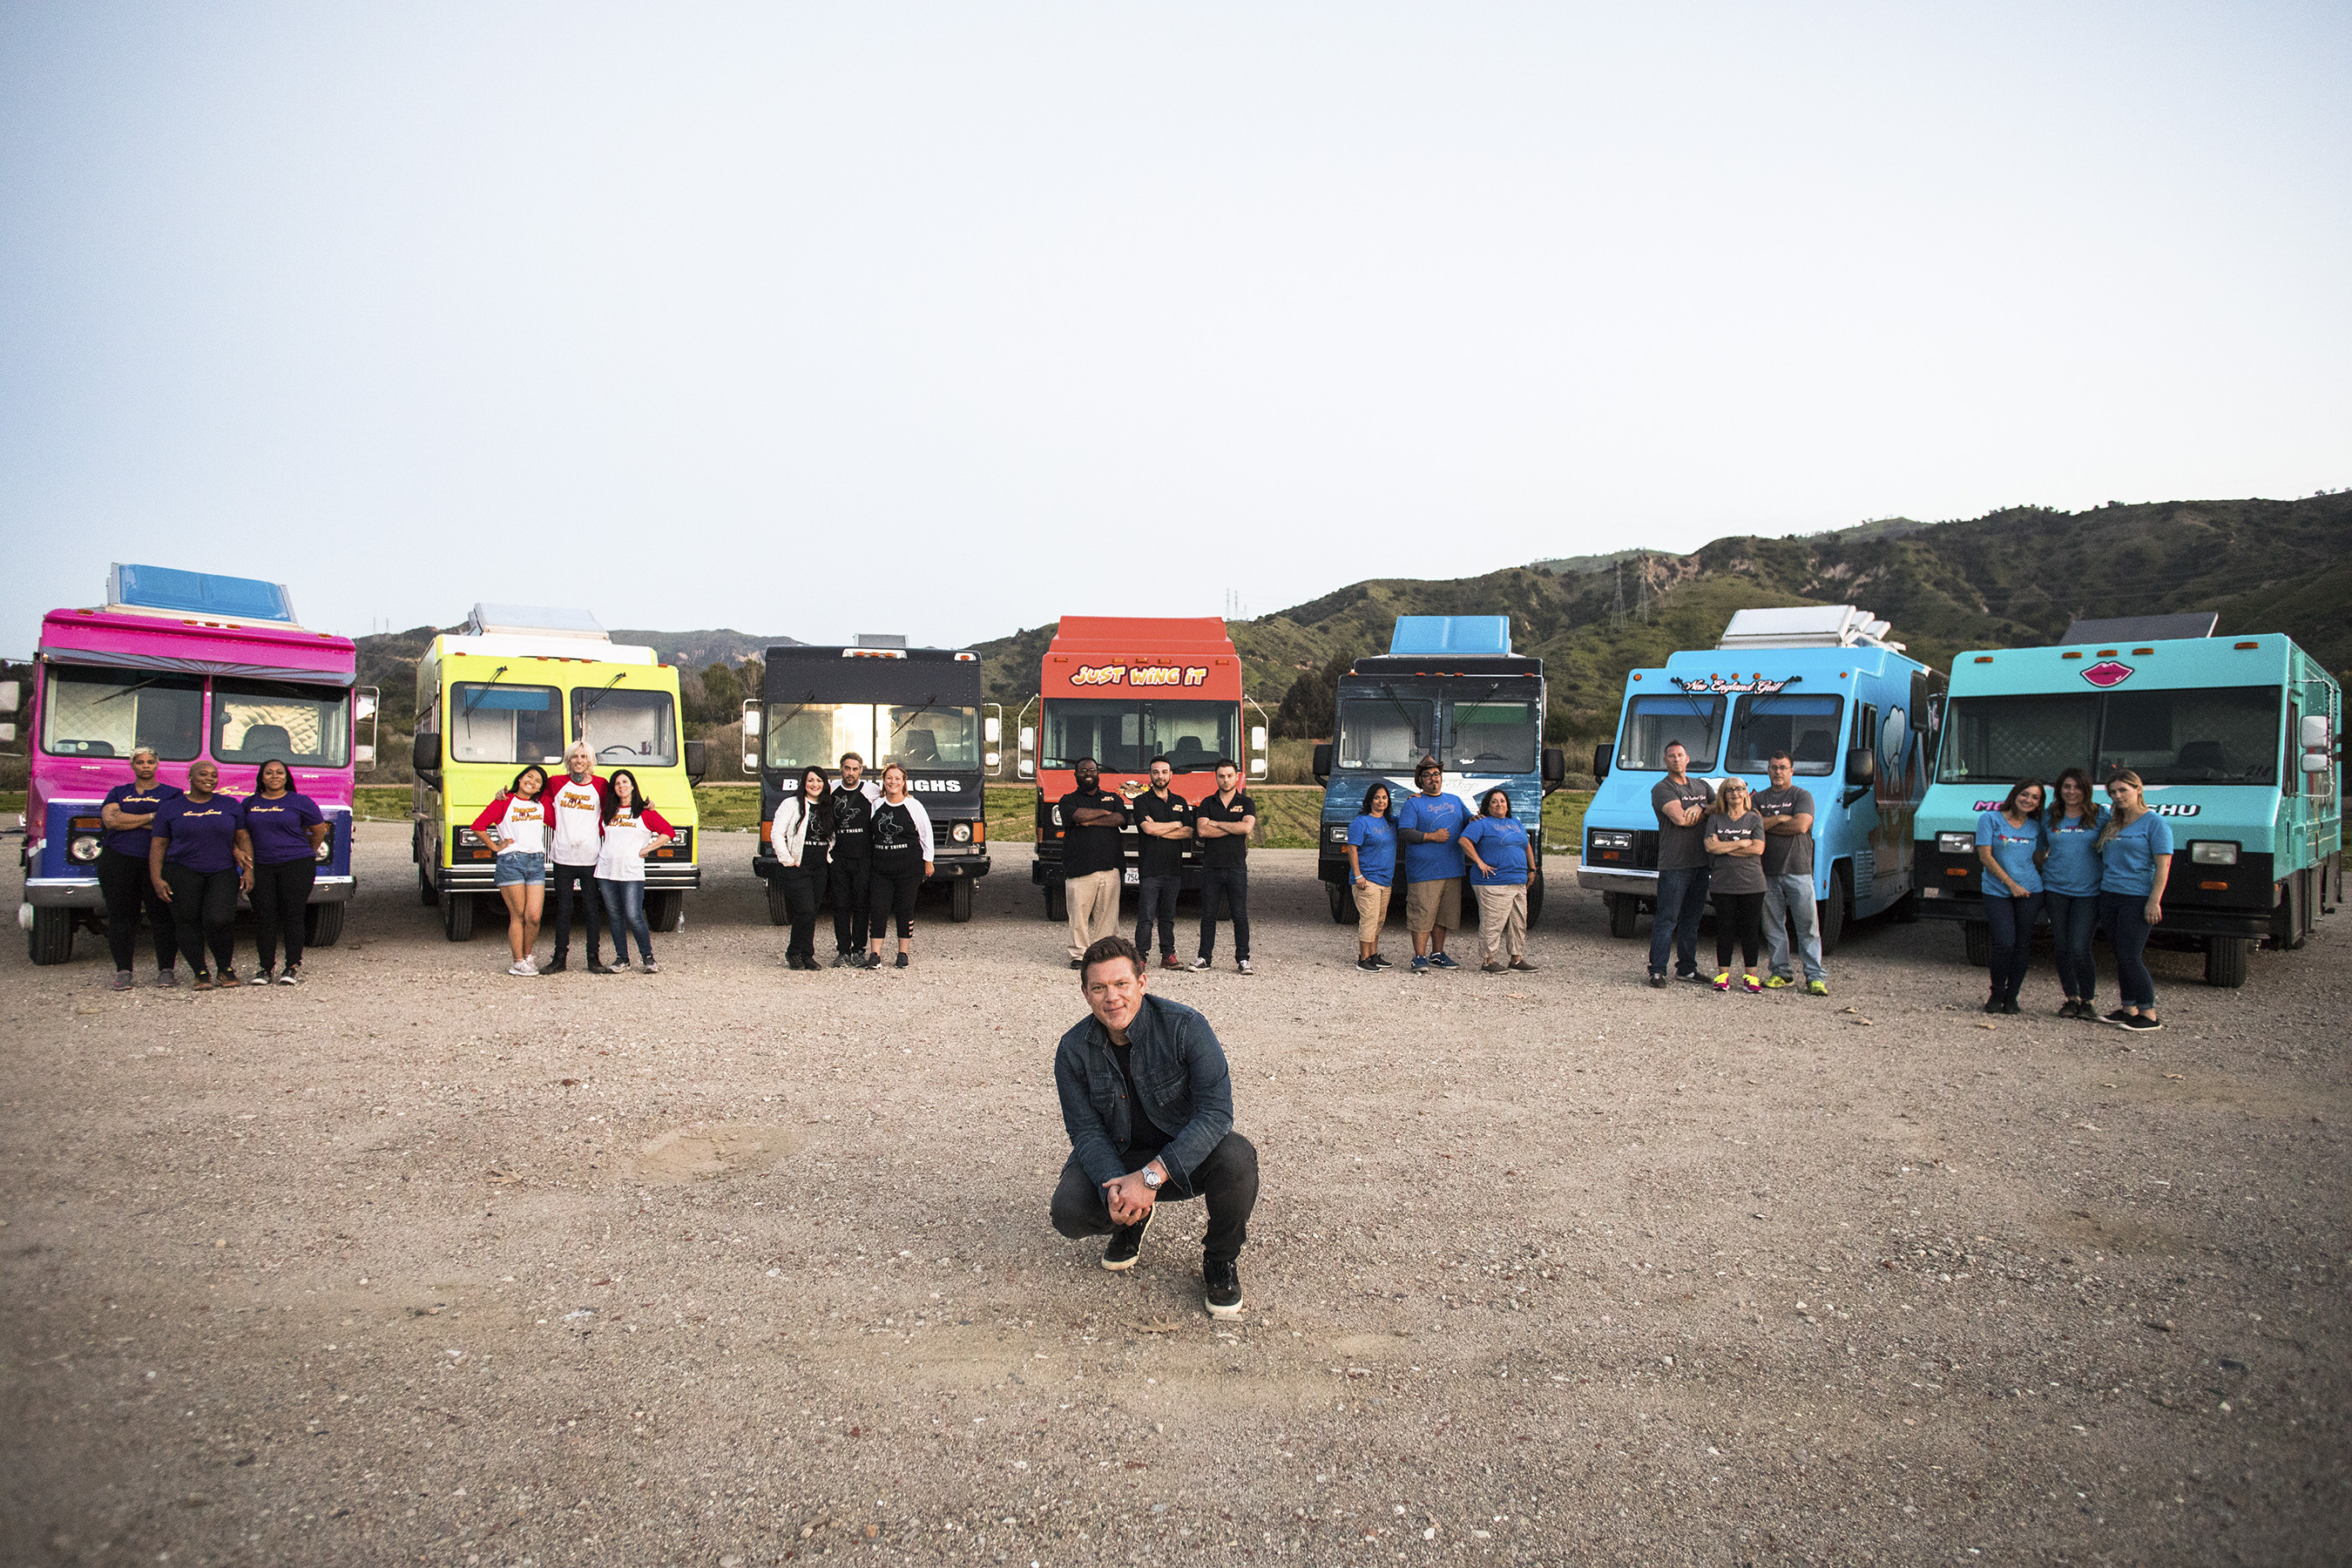 Host Tyler Florence with the teams on Food Network's The Great Food Truck Race